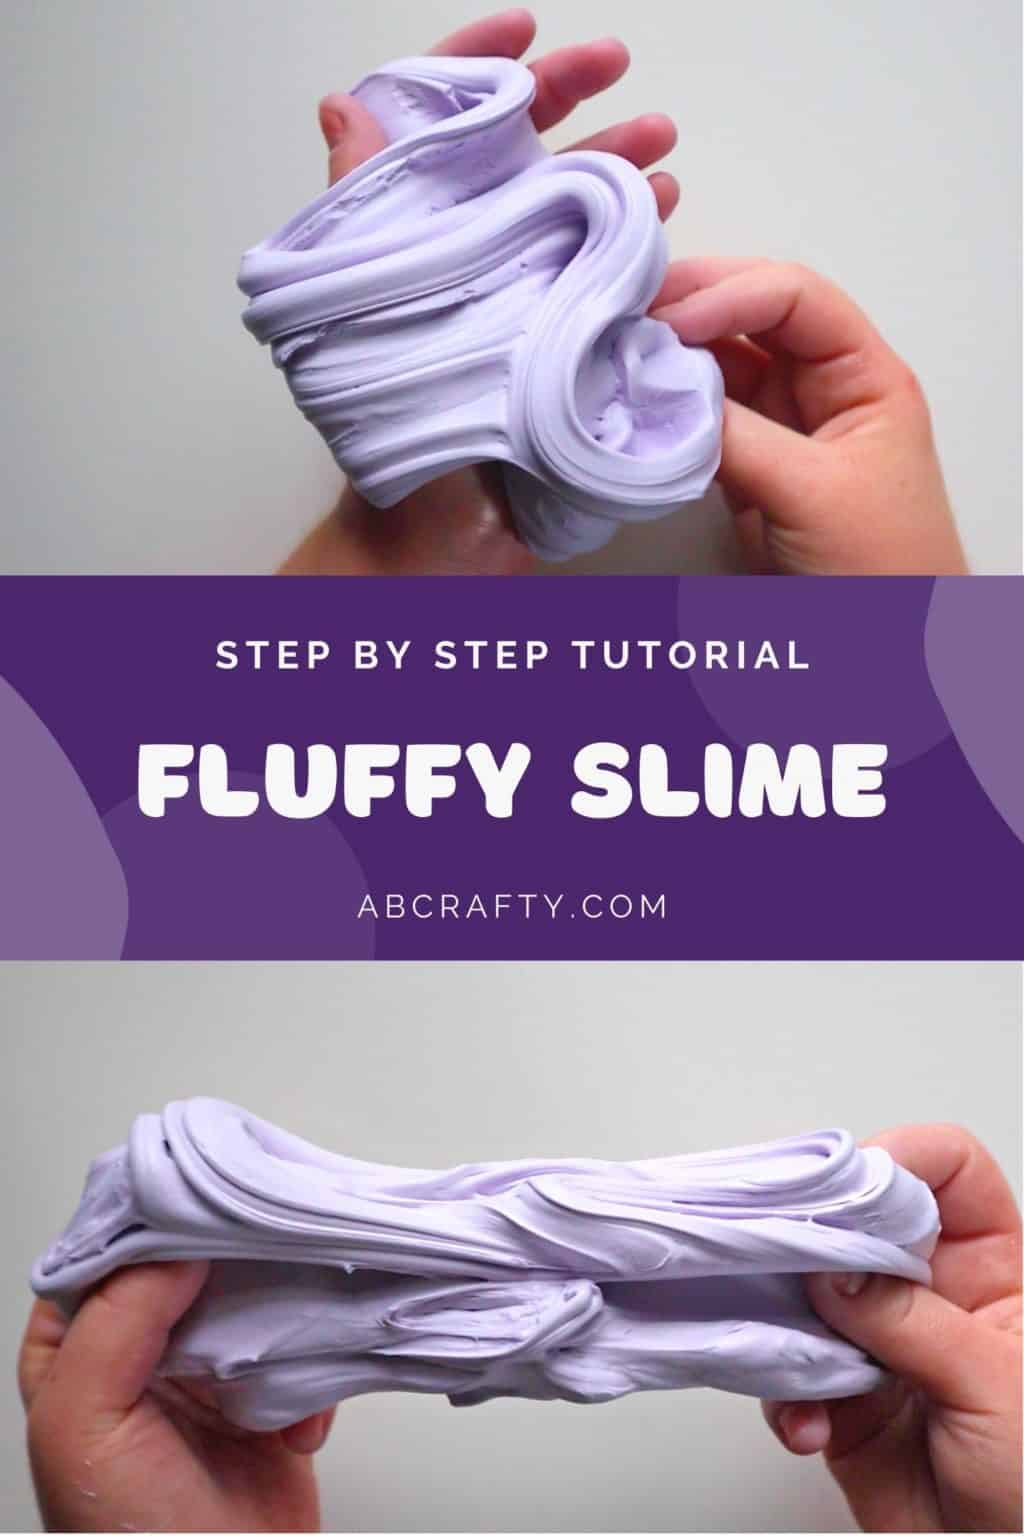 top image is purple puffy slime drizzled into the hand and the bottom is stretching it to show the thick pillowy texture. The title reads "fluffy slime - step by step tutorial, abcrafty.com"